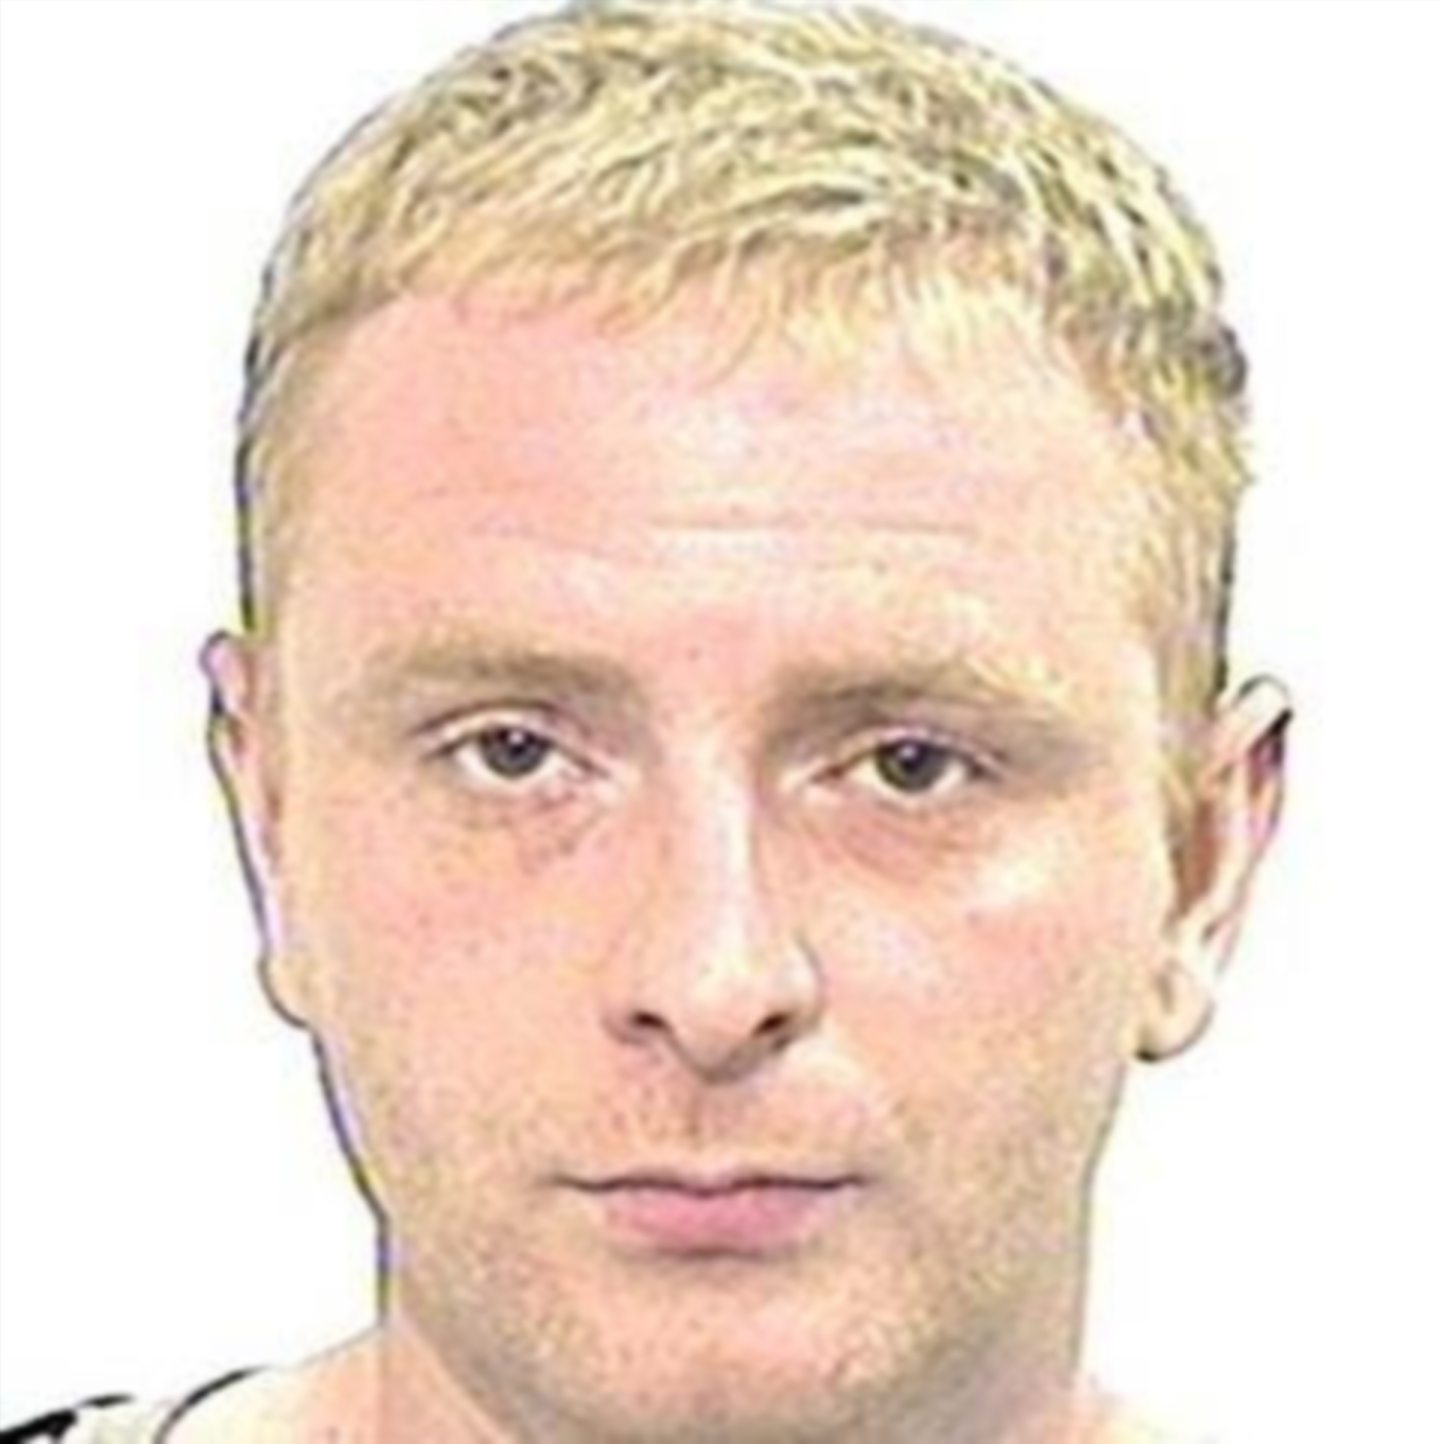 Law killer Robbie McIntosh, pictured aged 31 after admitting the attempted murder of Linda McDonald at Templeton Woods.